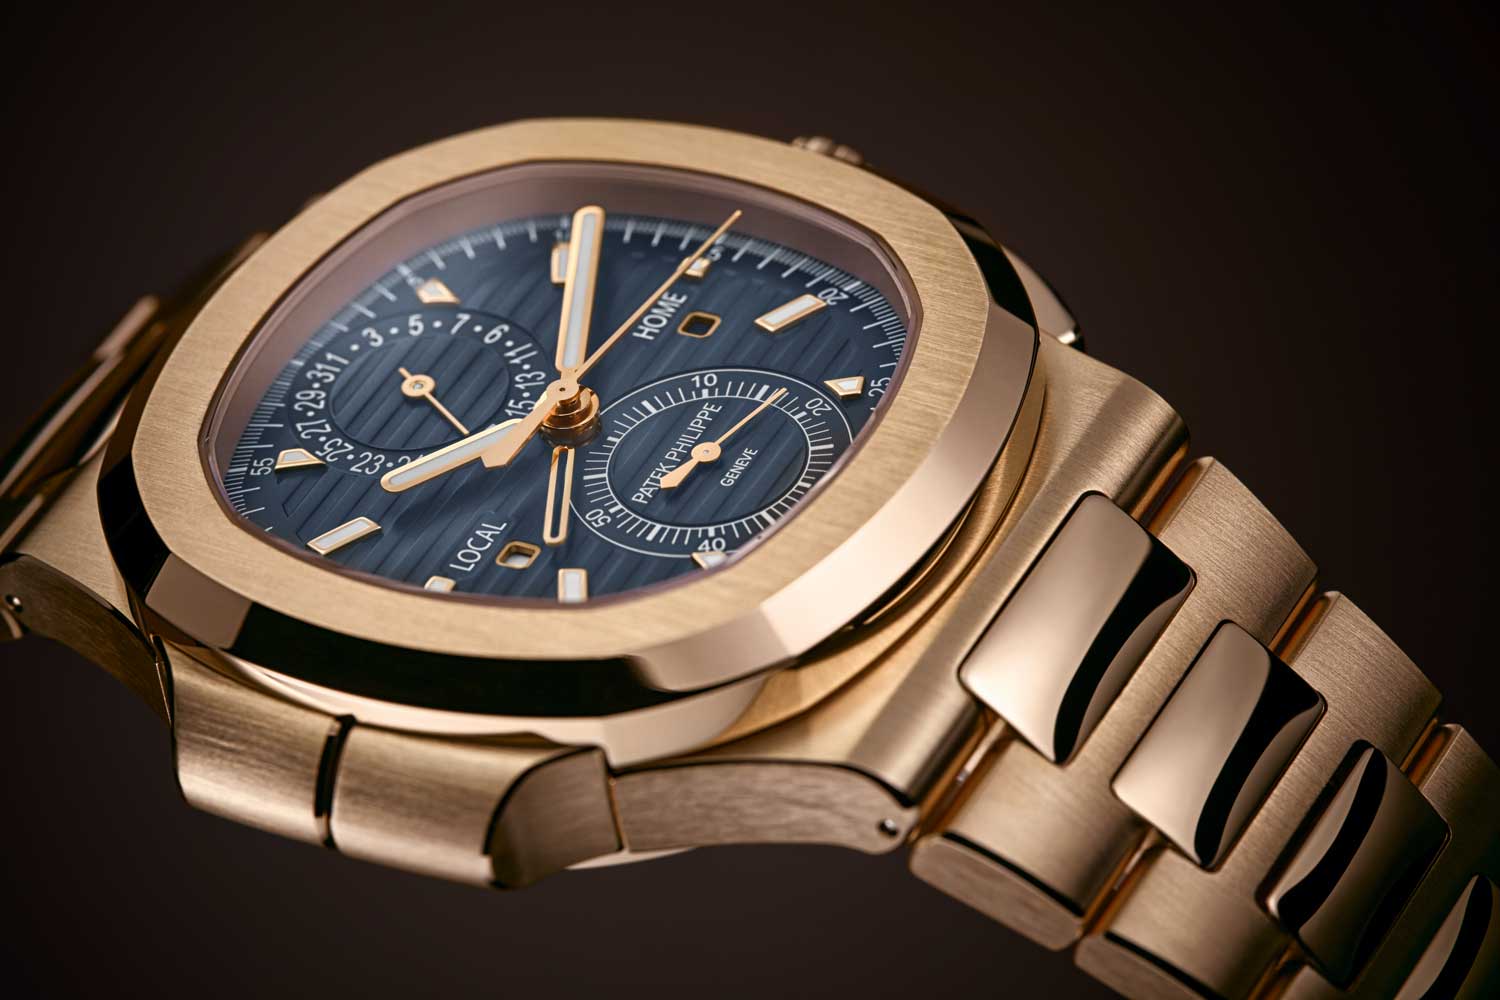 Patek Philippe Nautilus Travel Time Chronograph Ref. 5990/1R-001: a new look in rose gold with a blue sunburst dial